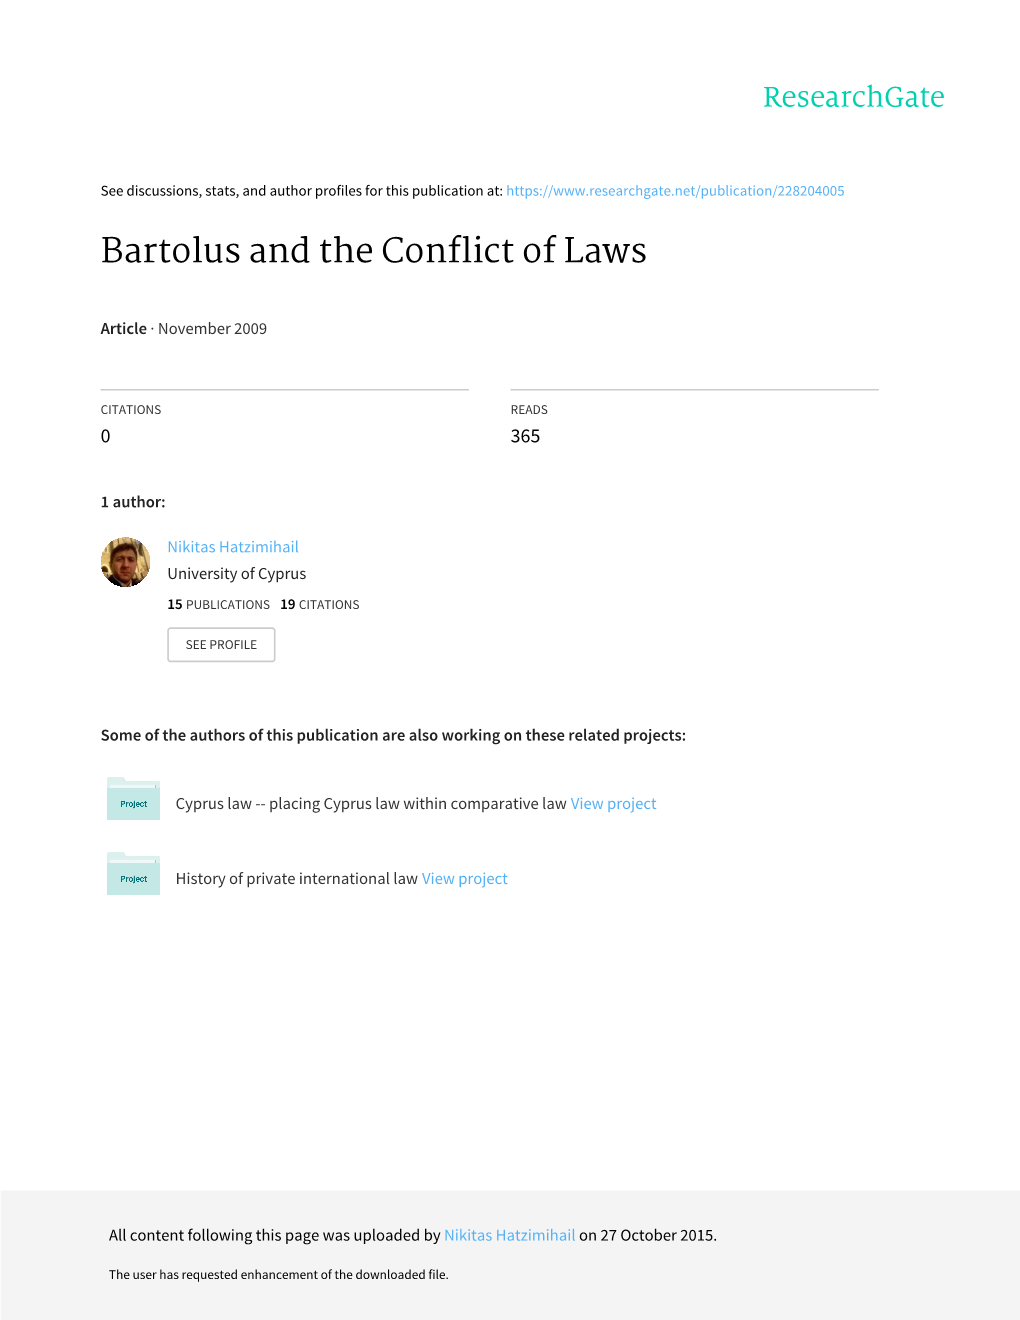 Bartolus and the Conflict of Laws